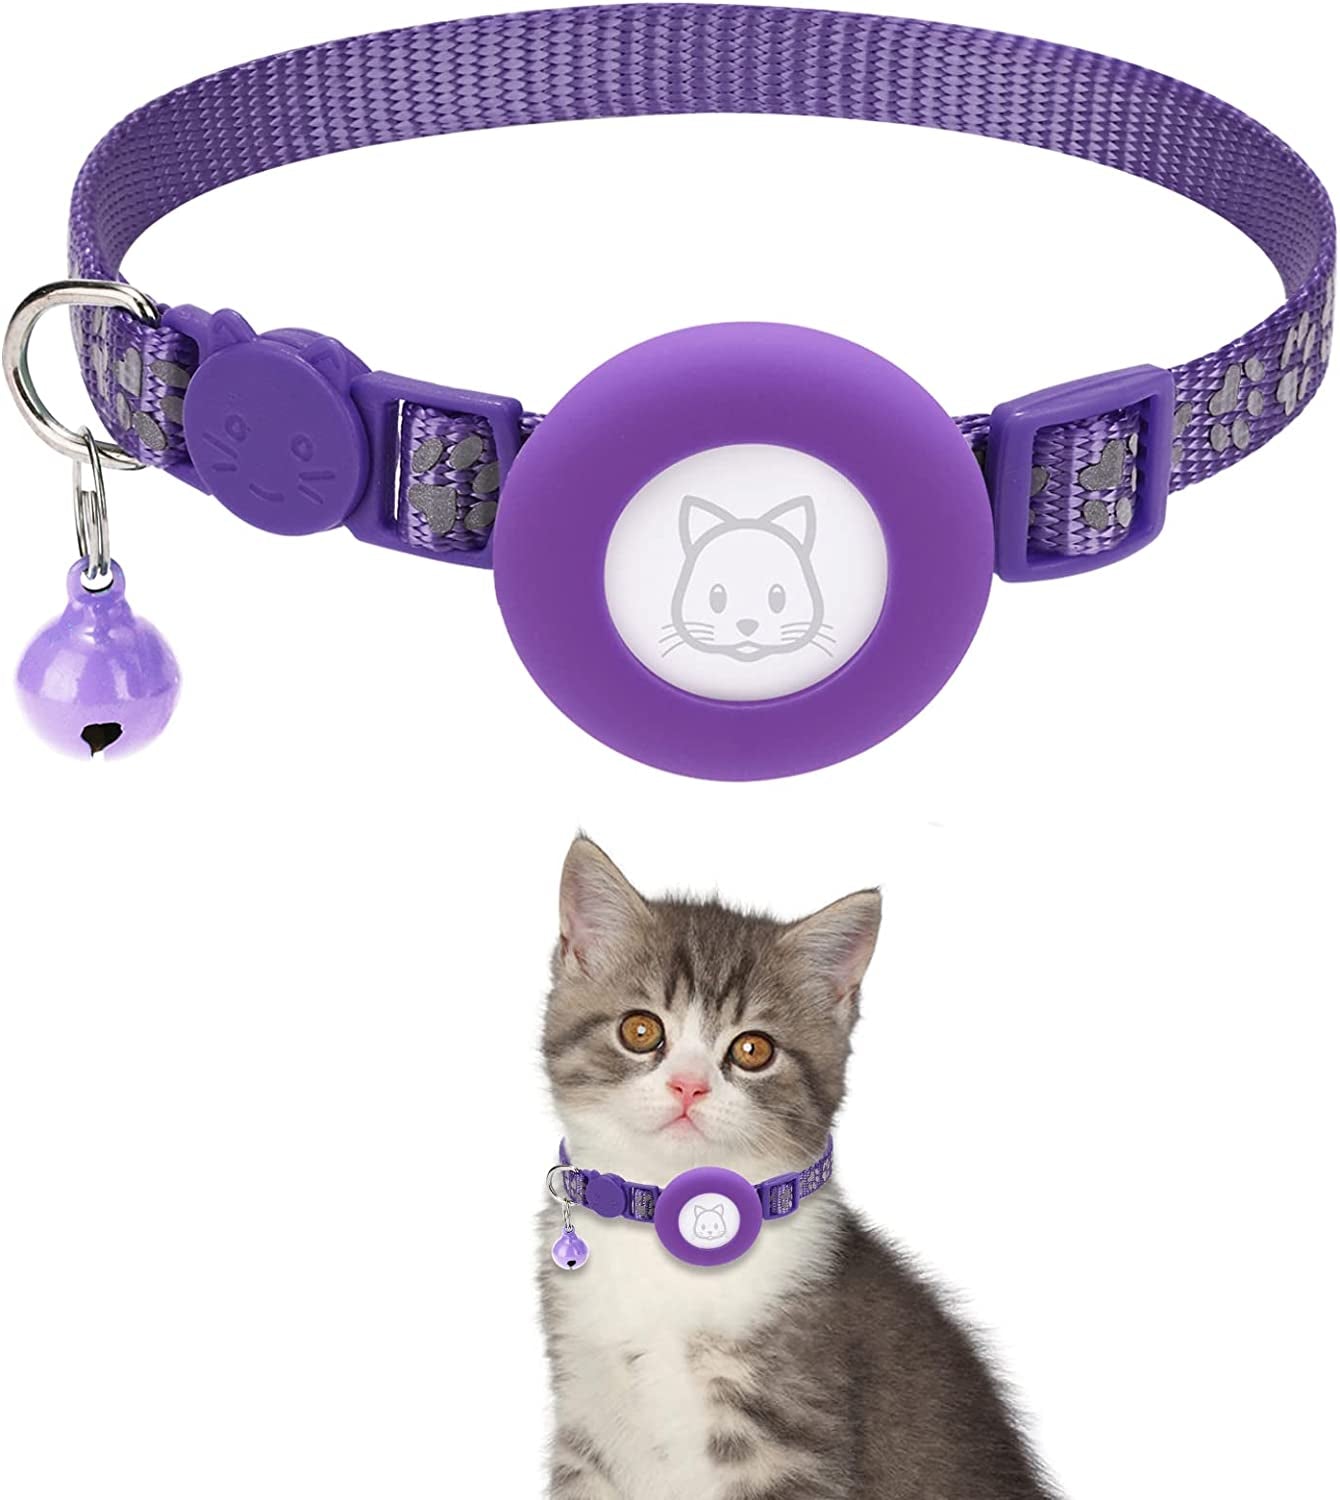 Airtag Cat Collar with Breakaway Bell, Reflective Paw Pattern Strap with Air Tag Case for Cat Kitten and Extra Small Dog (Pink)